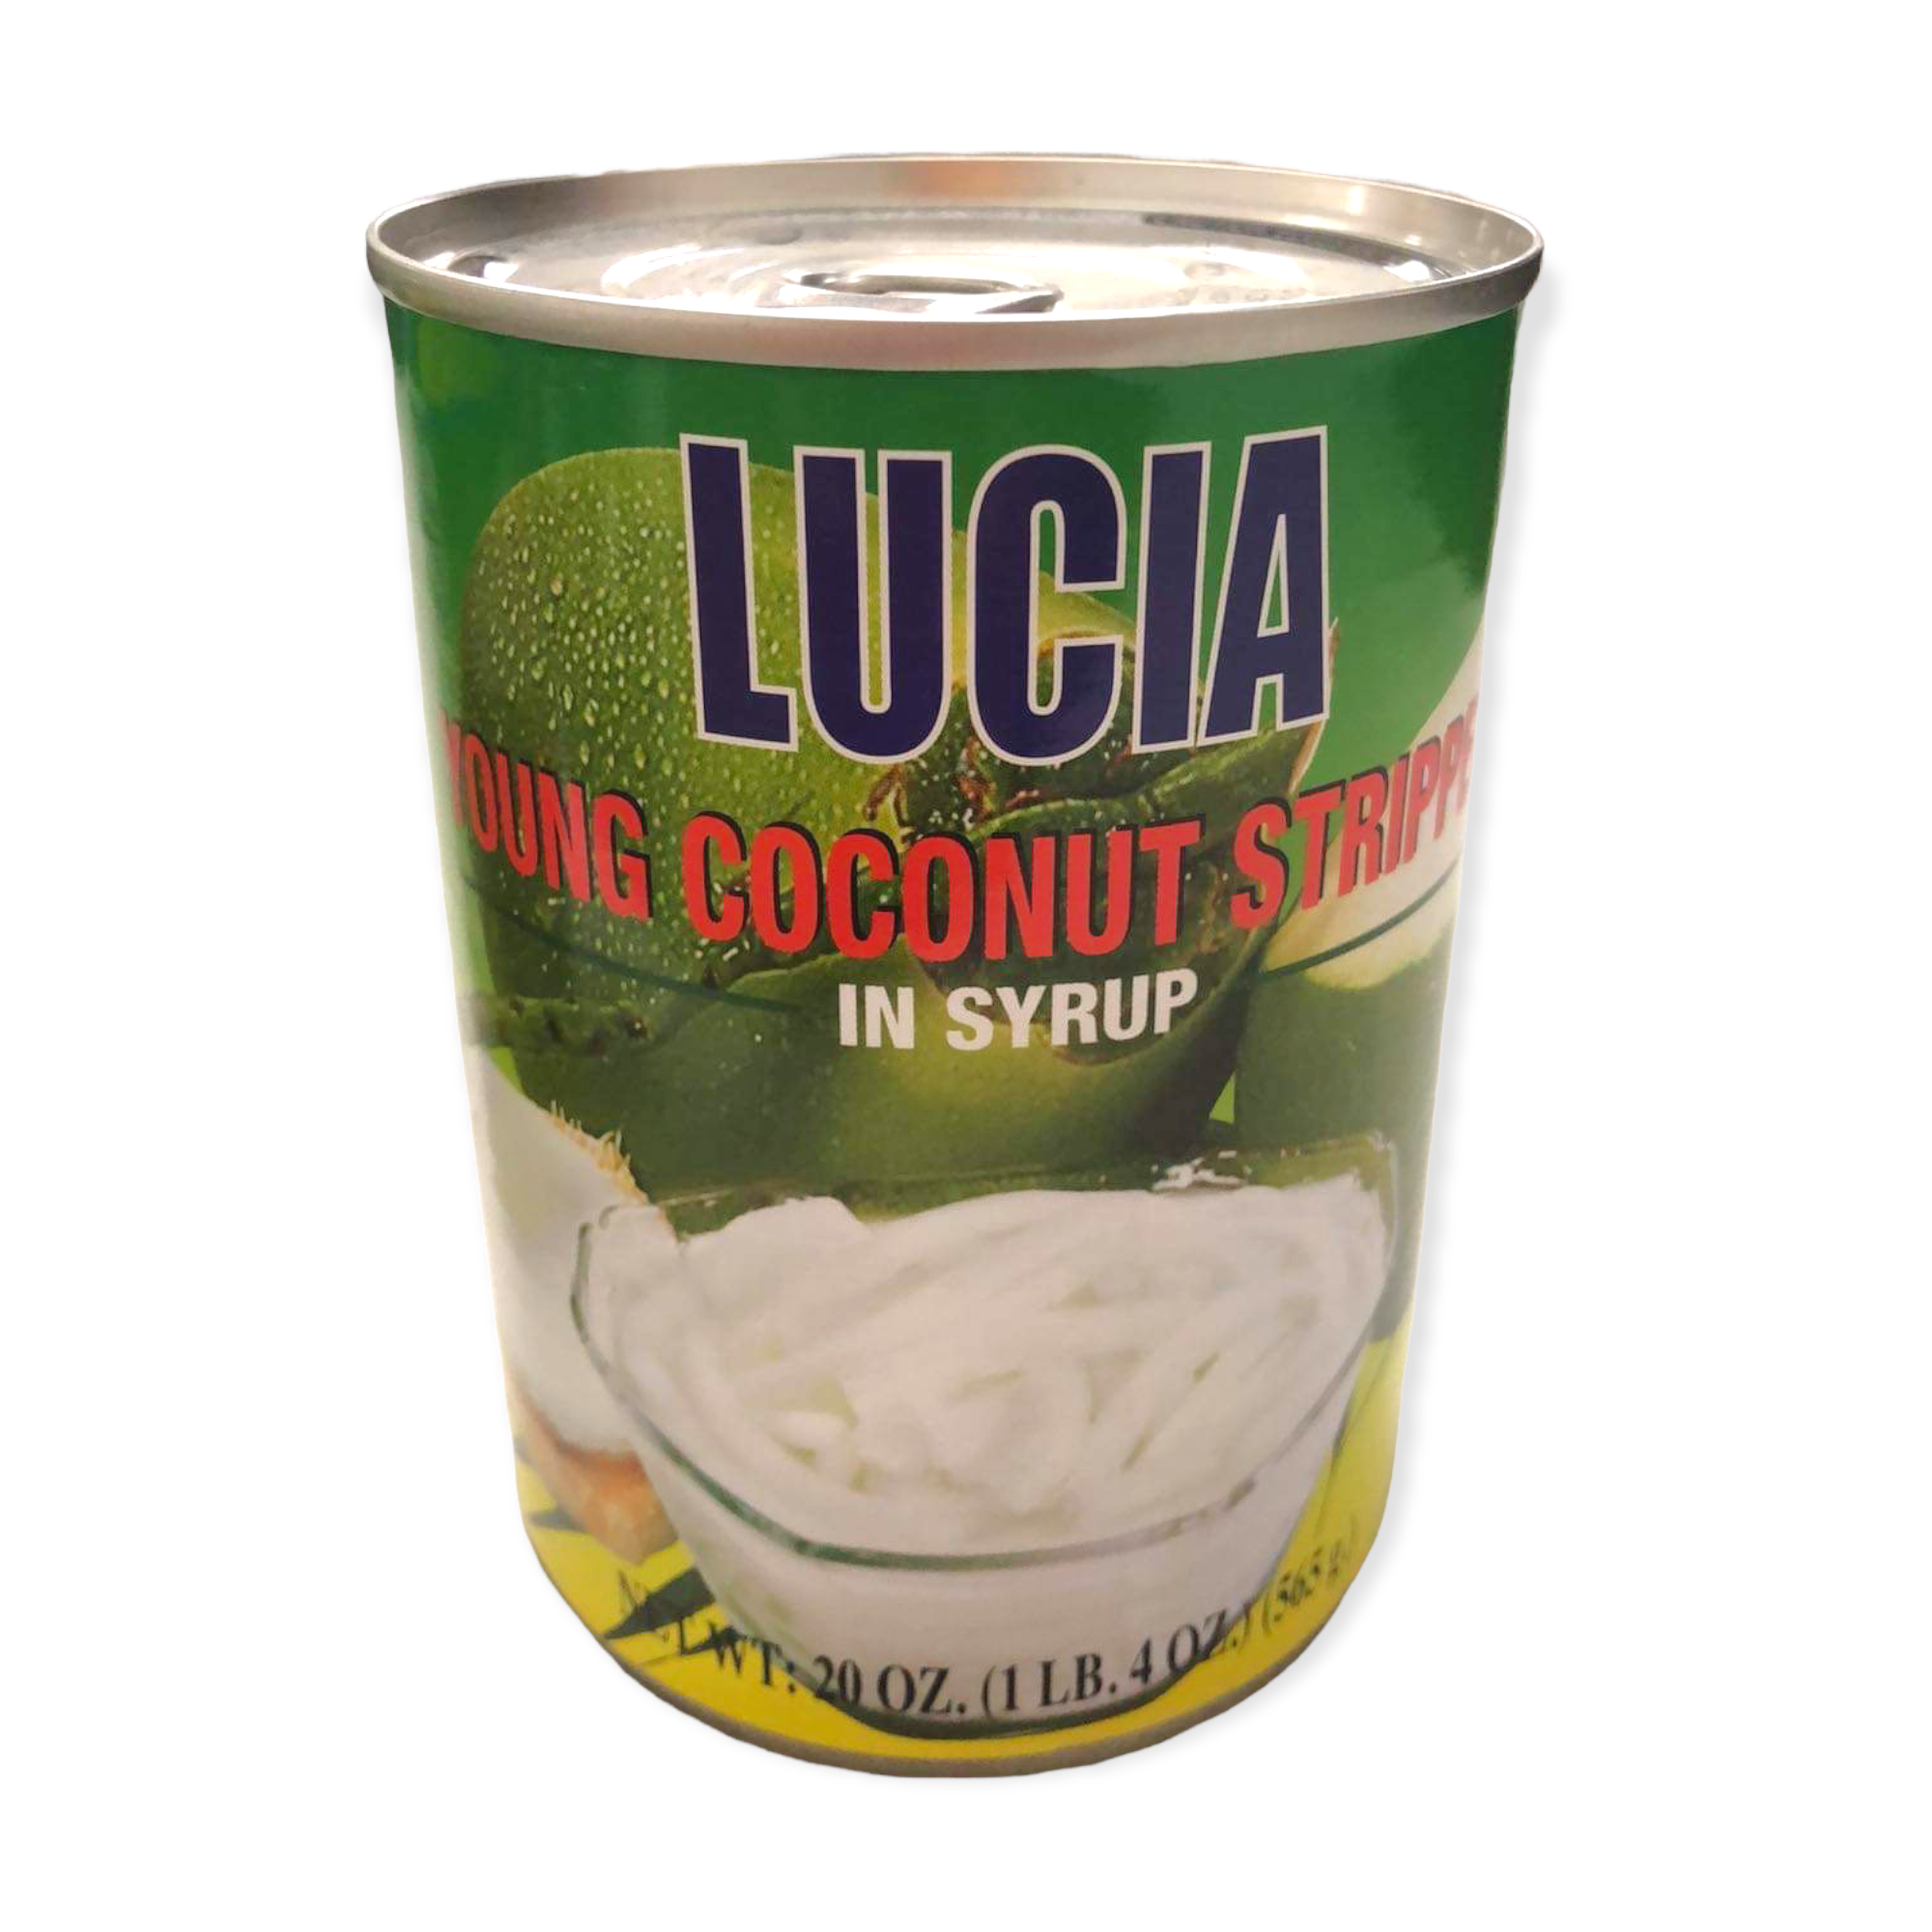 Lucia - Young Coconut Stripped in Syrup - 20 OZ